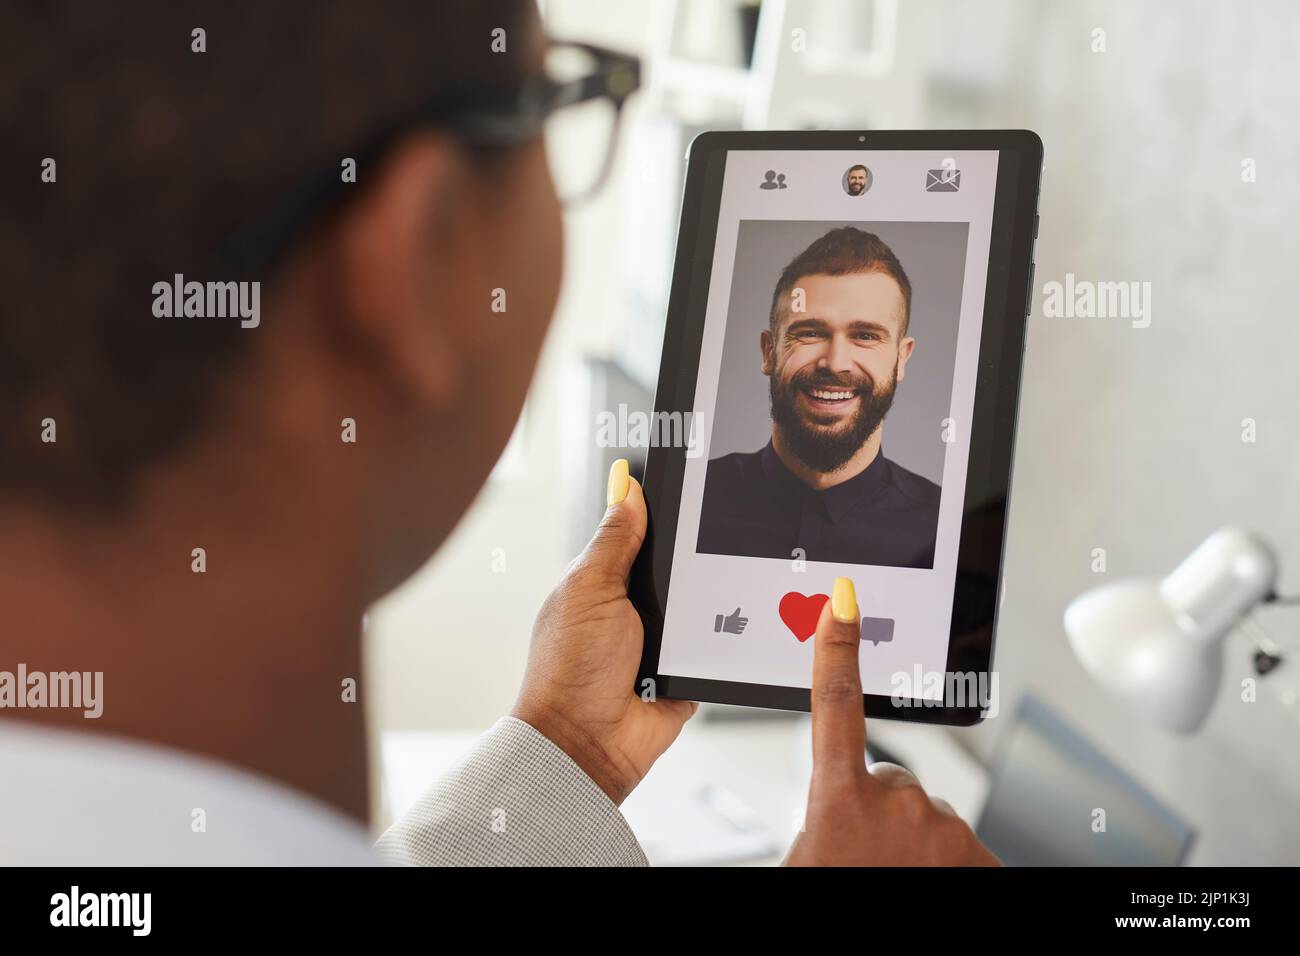 Woman gives like to profile picture of young man on online dating app or website Stock Photo